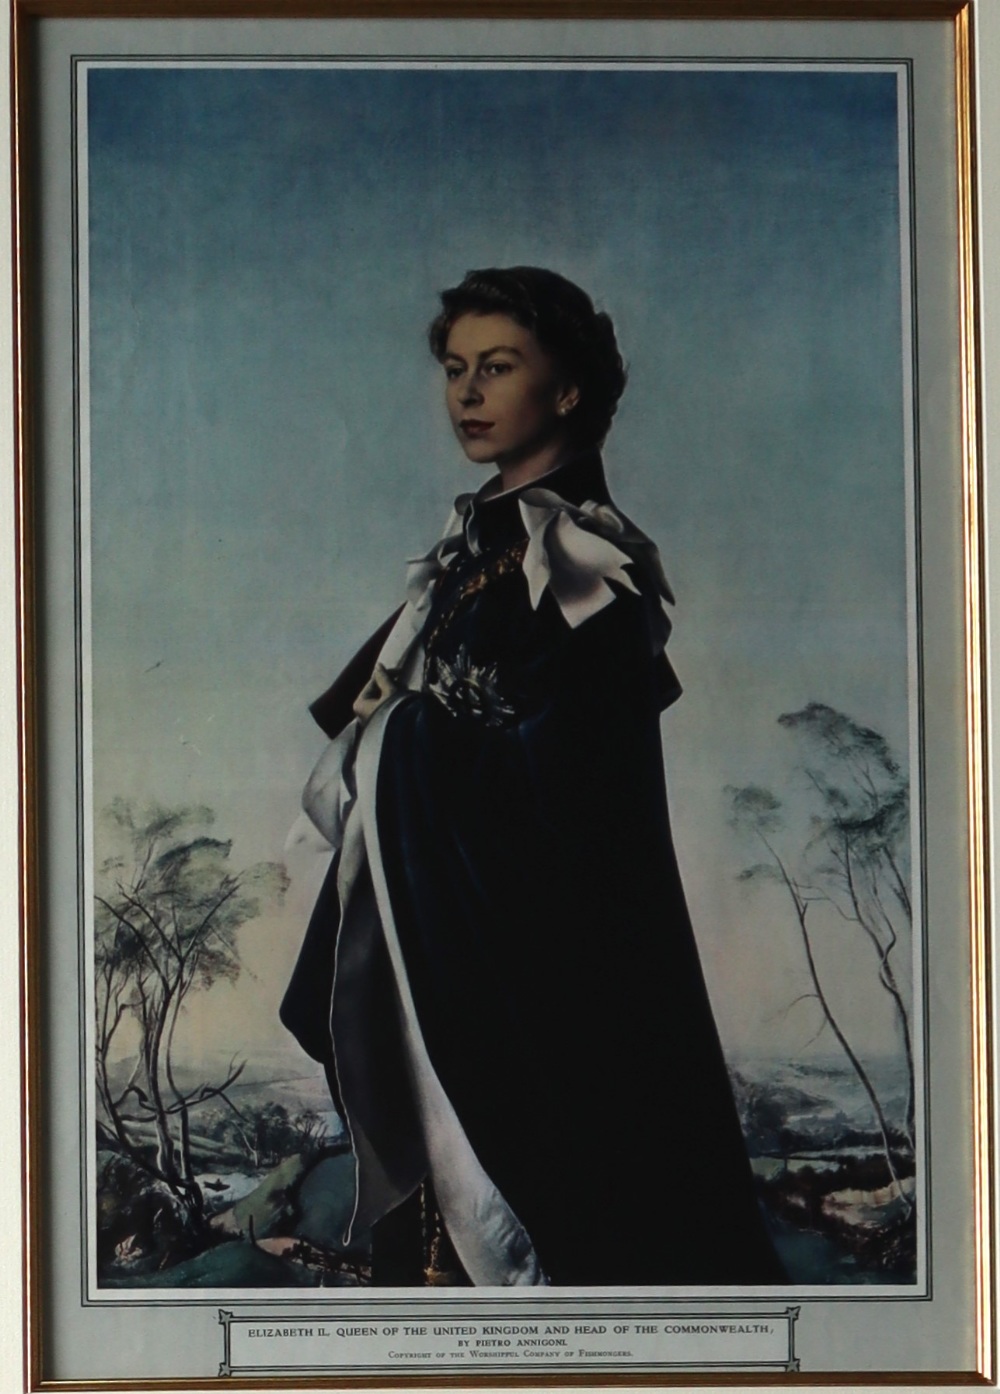 Queen Elizabeth II a framed image of the young Queen after Pietro Annigoni together with an autopen - Bild 2 aus 4